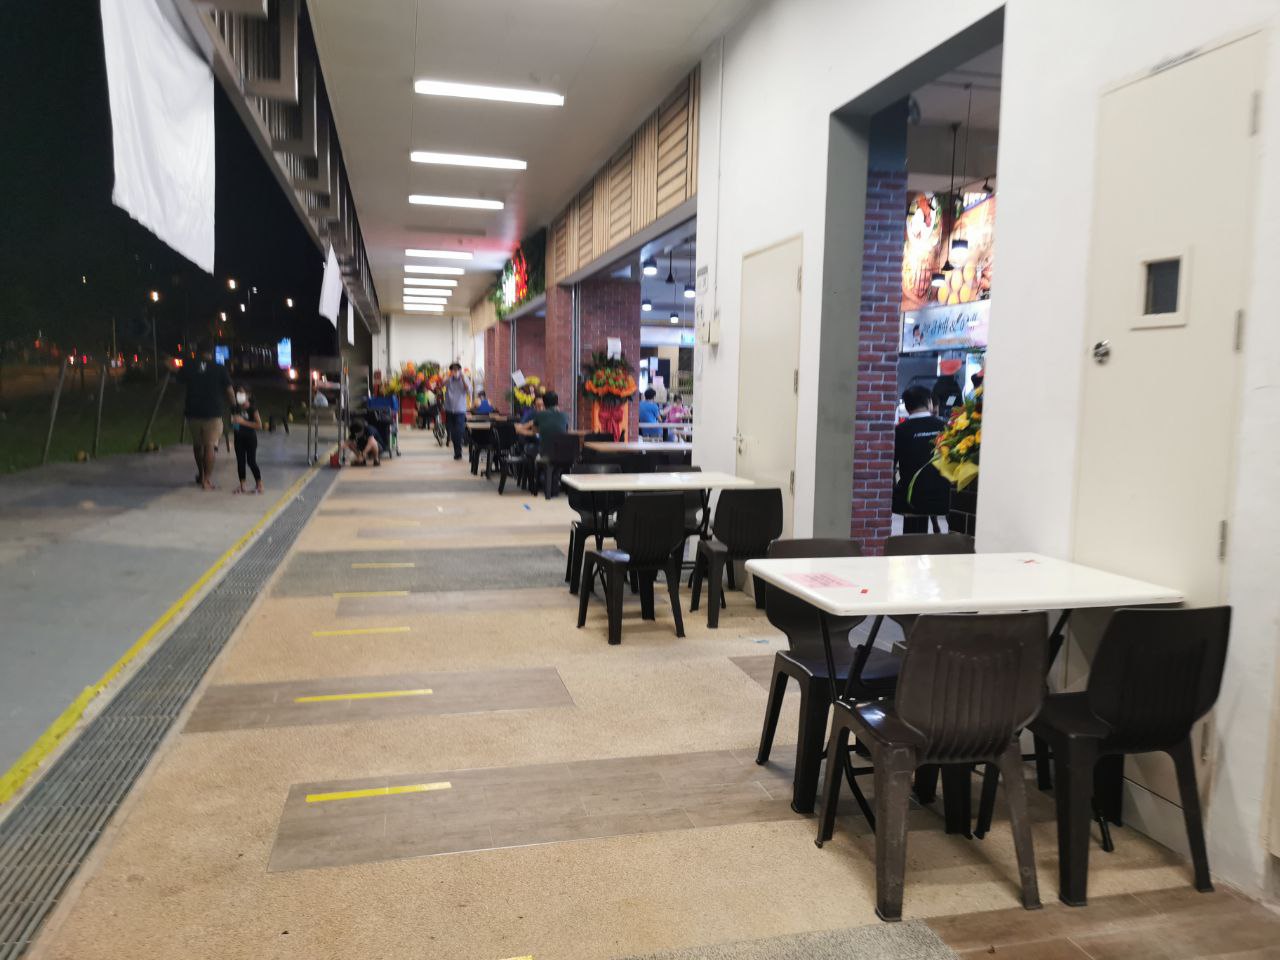 Newly opened Sengkang removes outdoor tables